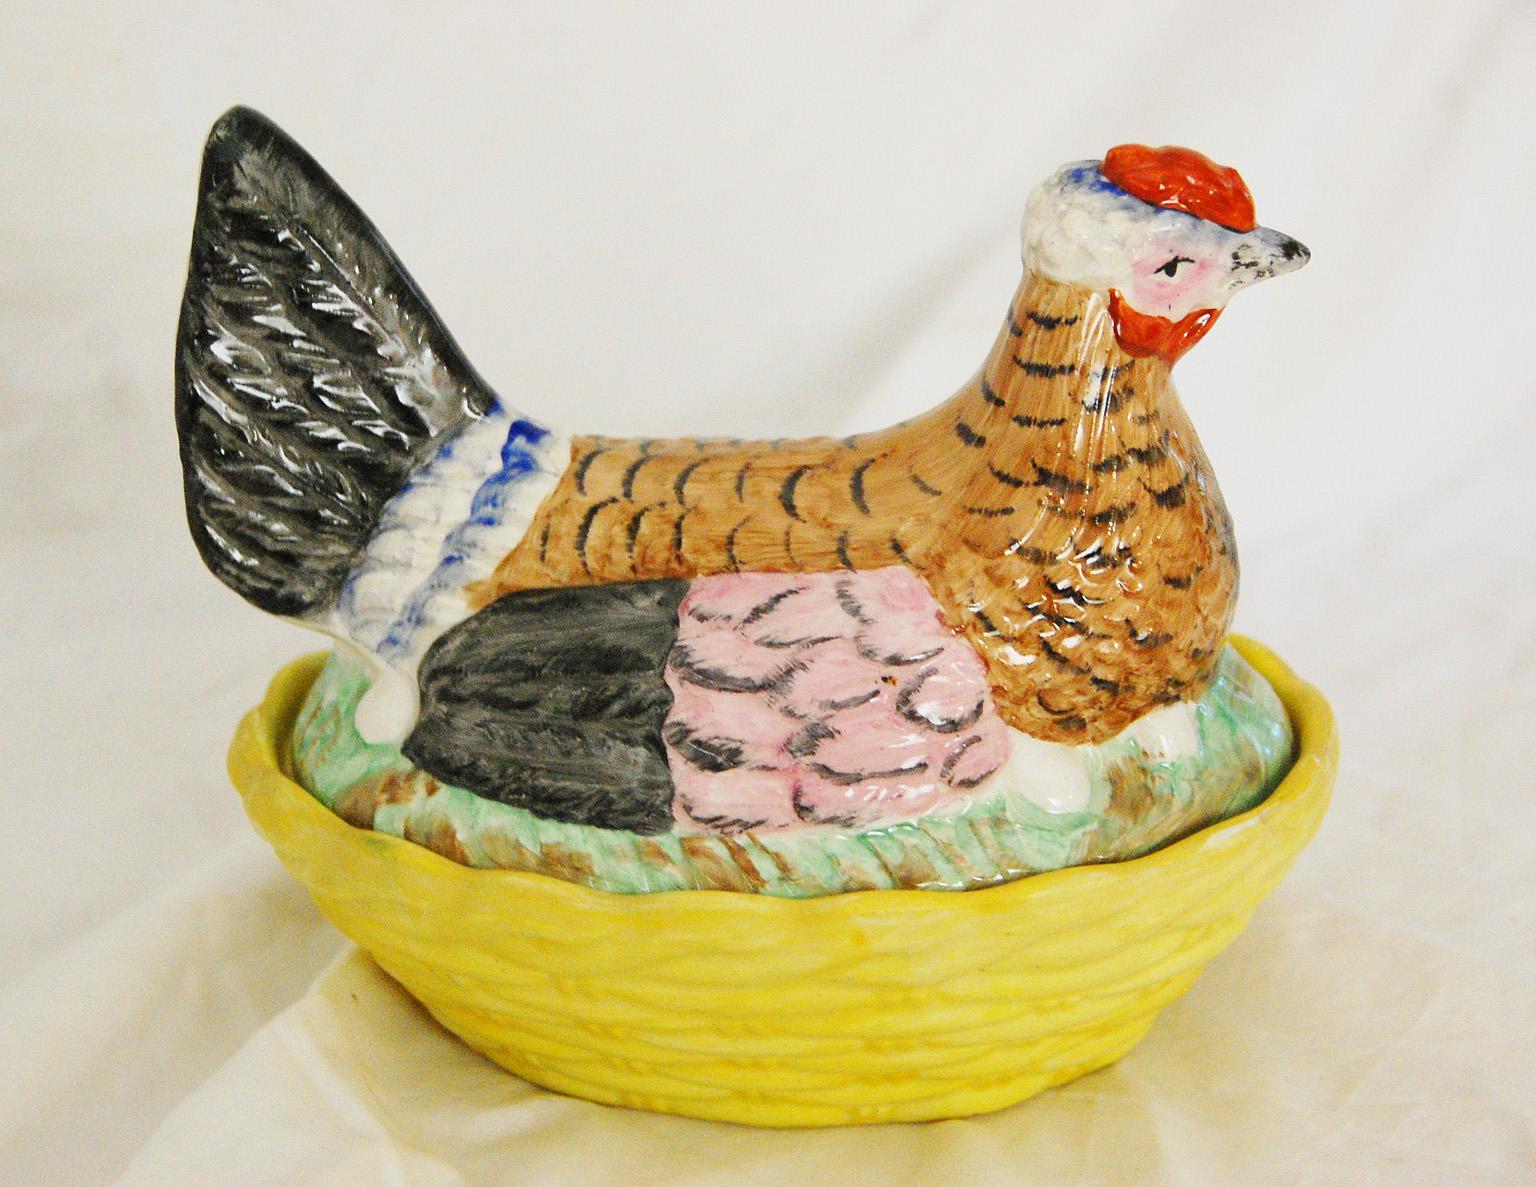 English Staffordshire ironstone chicken on a yellow basket. This hand painted chicken and basket are multi colored, the chicken having feathers in pink, a little blue, white, black and light chocolate brown with black feather detailing, sitting on